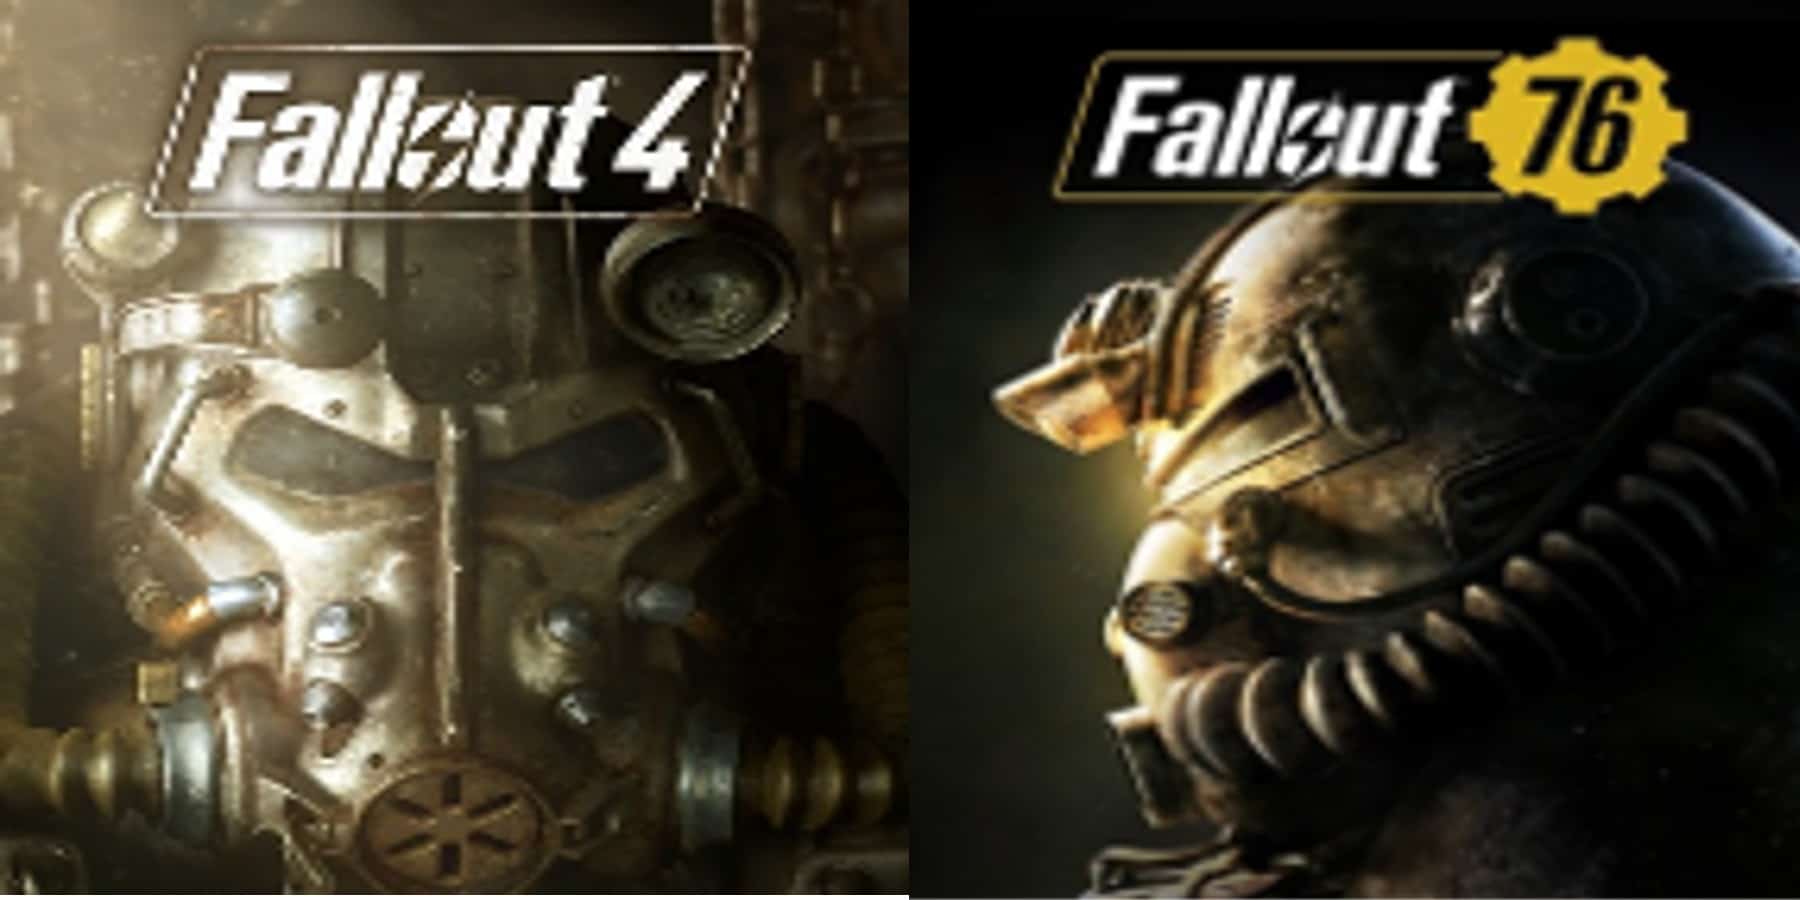 Cover art for Fallout 4 and Fallout 76